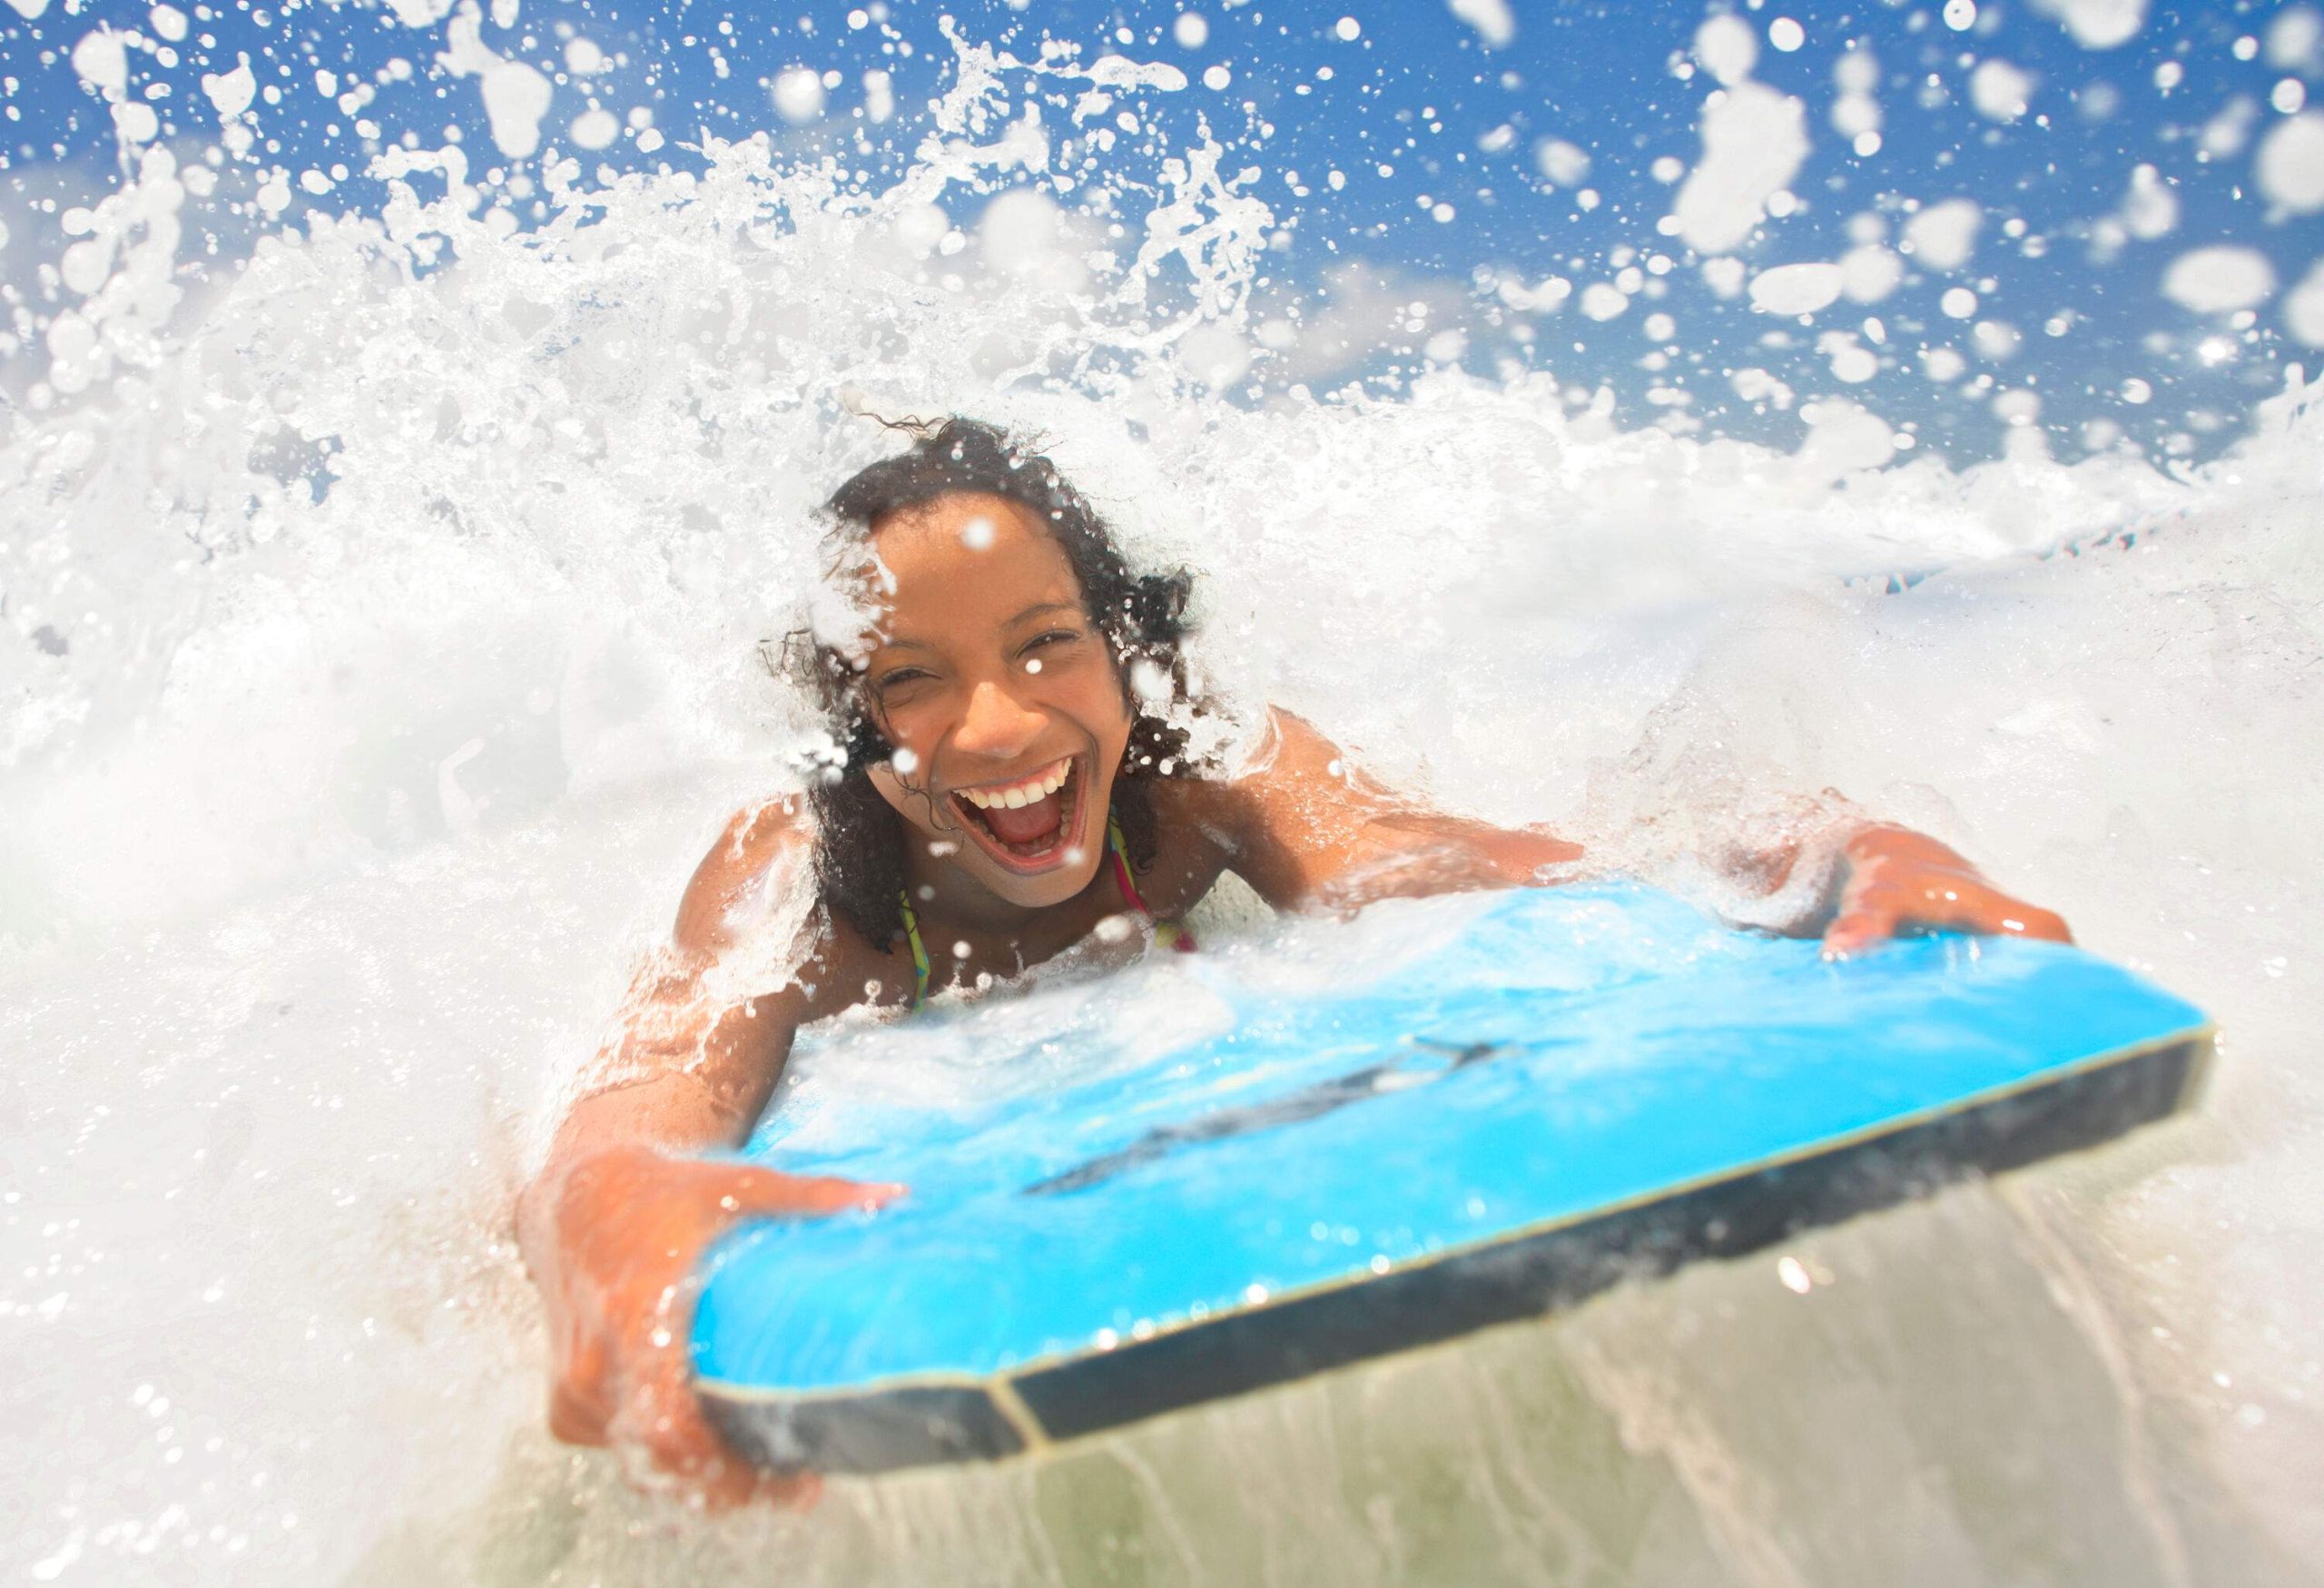 A happy female enjoys splashes of water while surfboarding.